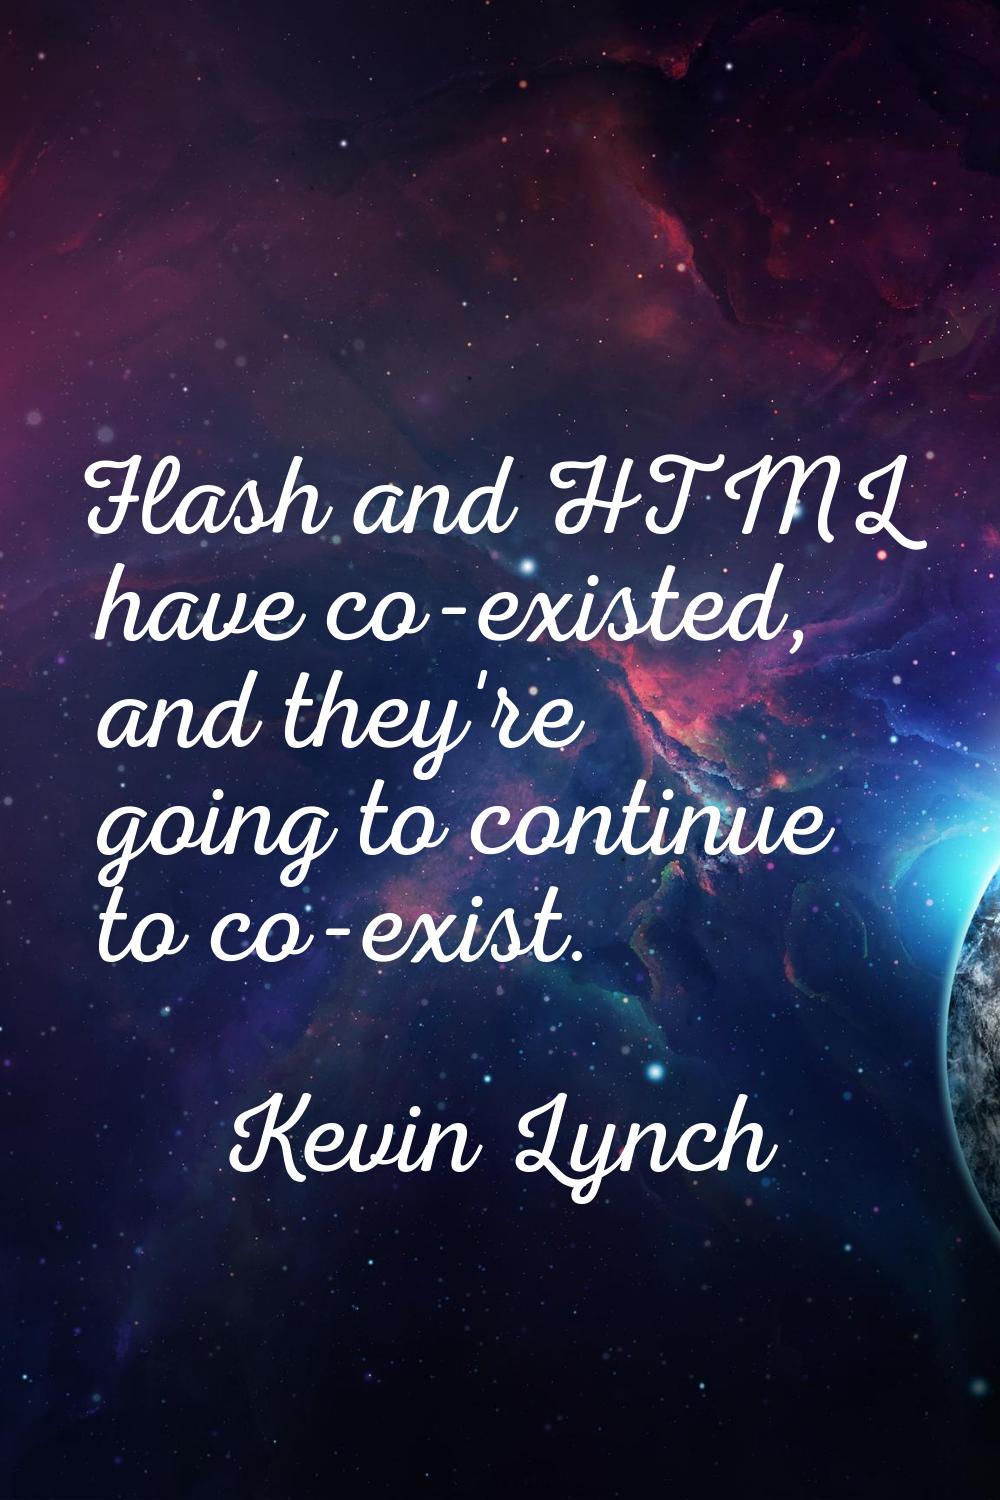 Flash and HTML have co-existed, and they're going to continue to co-exist.